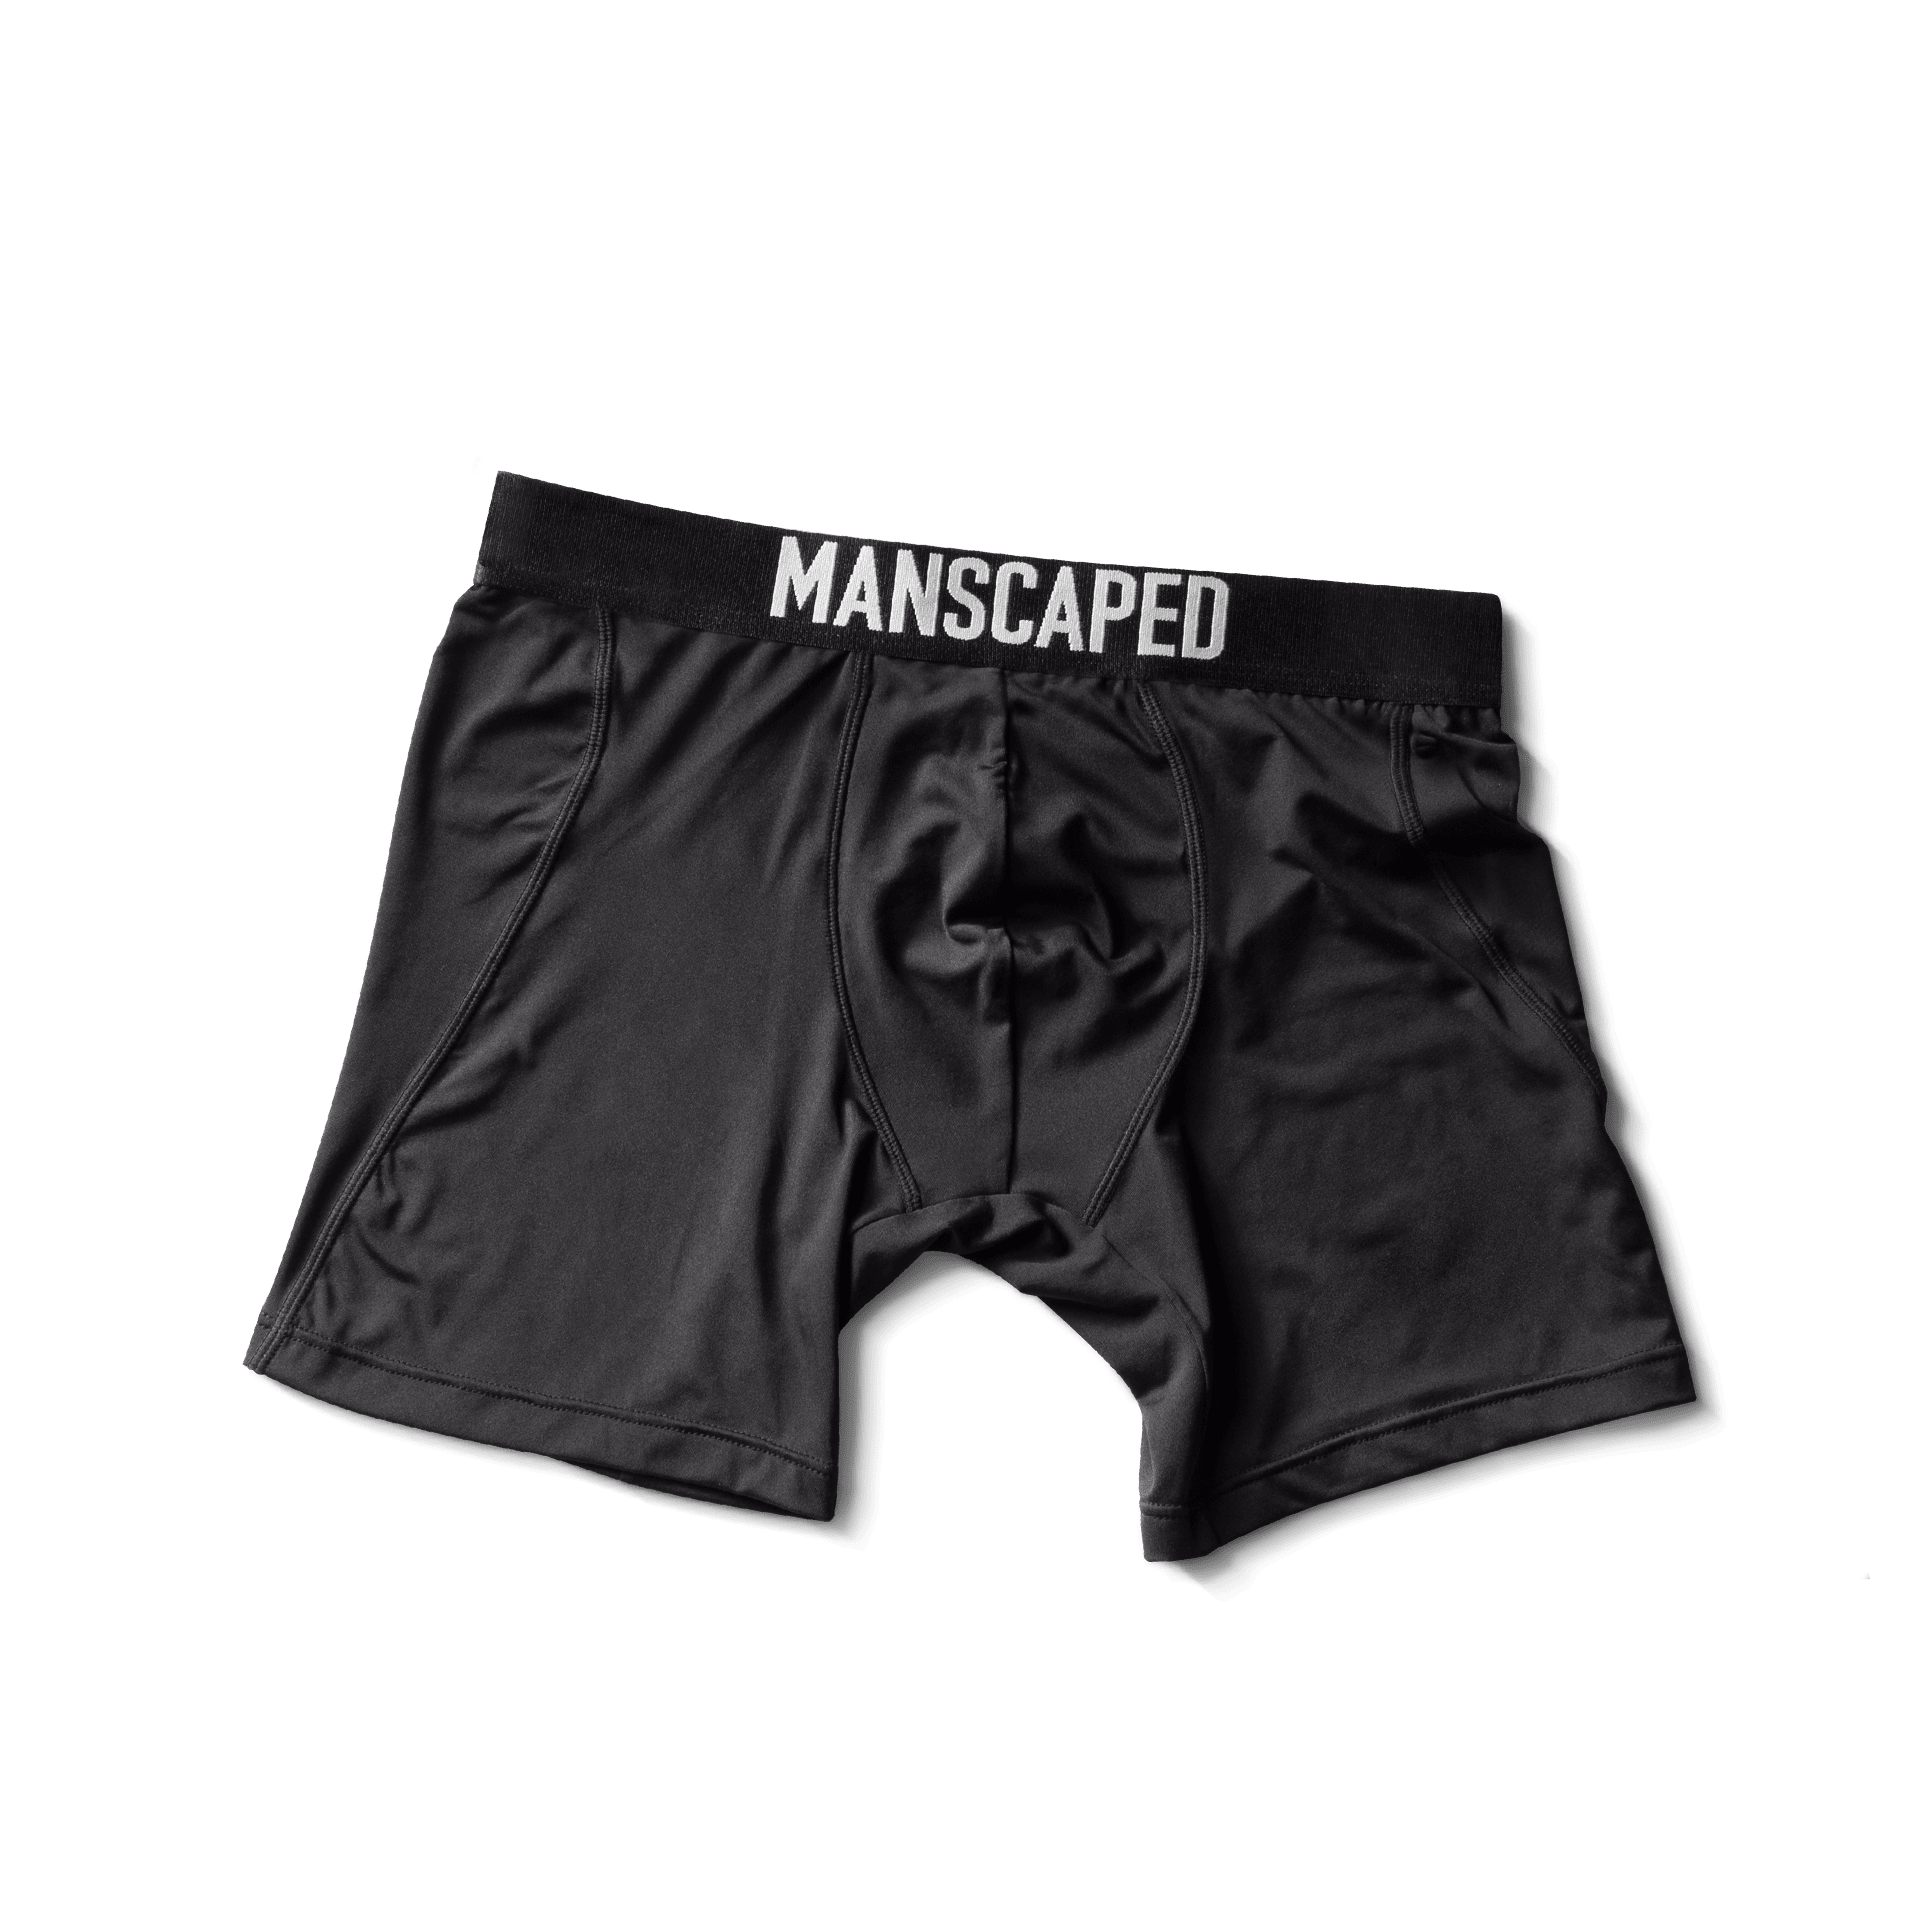 https://assets.manscaped.com/image/upload/f_auto,q_auto/v1701211457/product-assets/store/product-thumbnails/boxers-manscaping.png